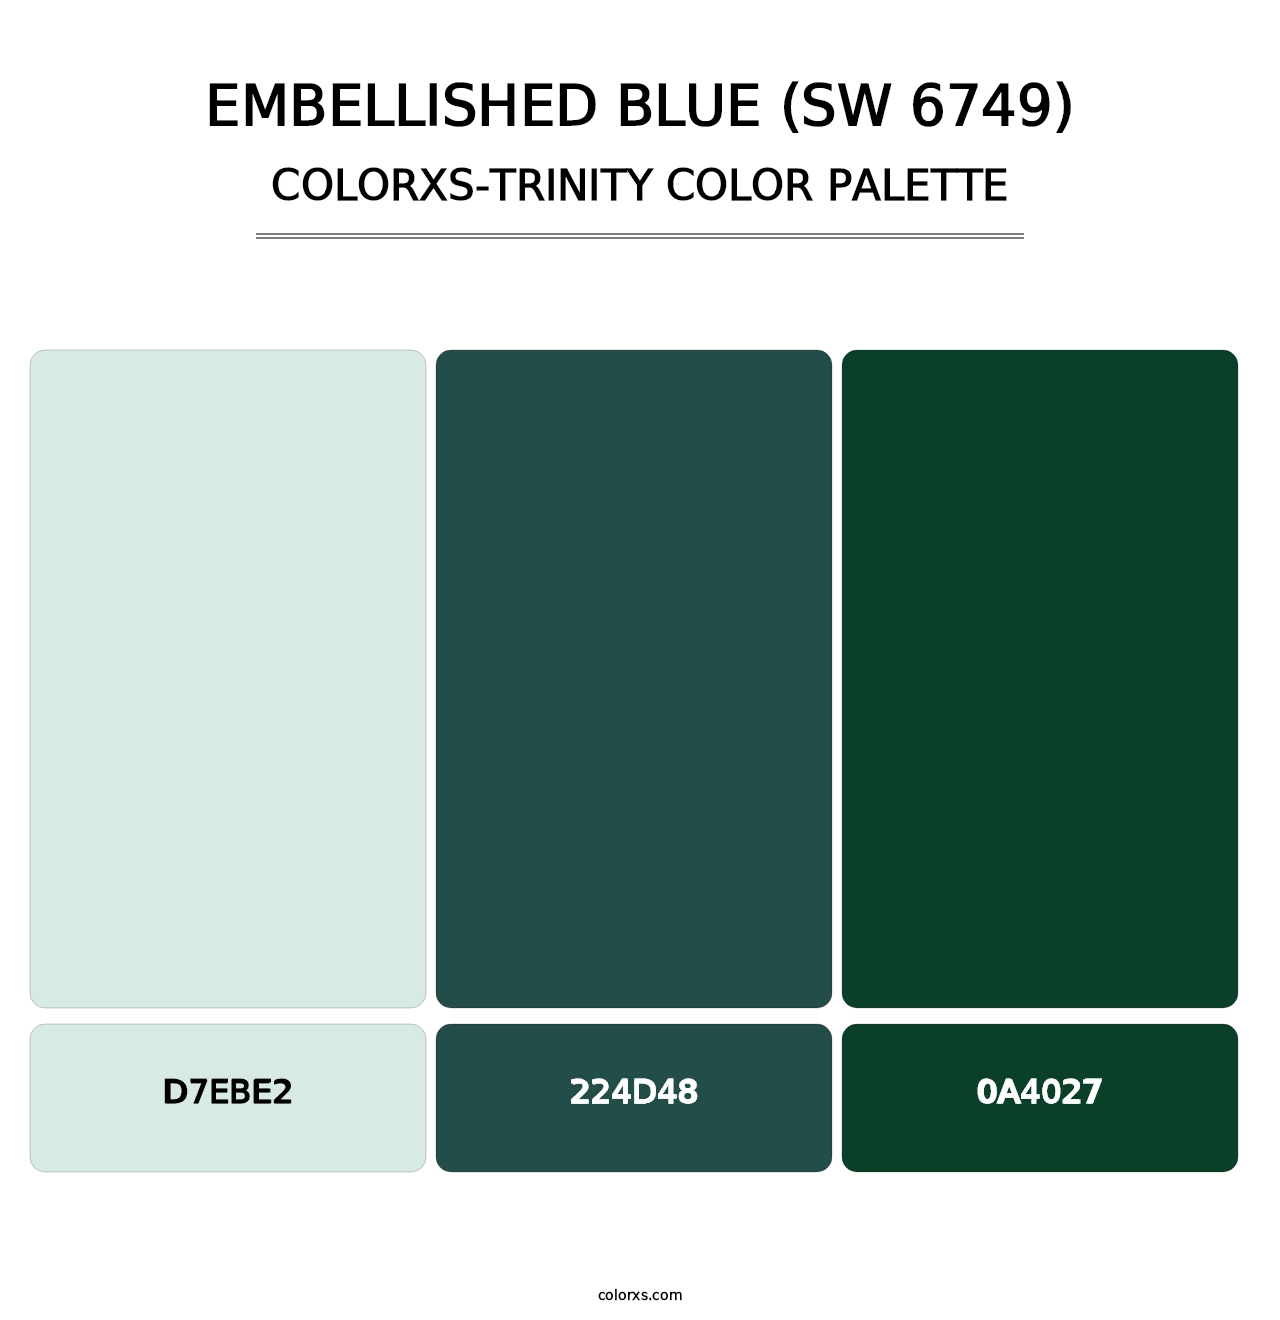 Embellished Blue (SW 6749) - Colorxs Trinity Palette